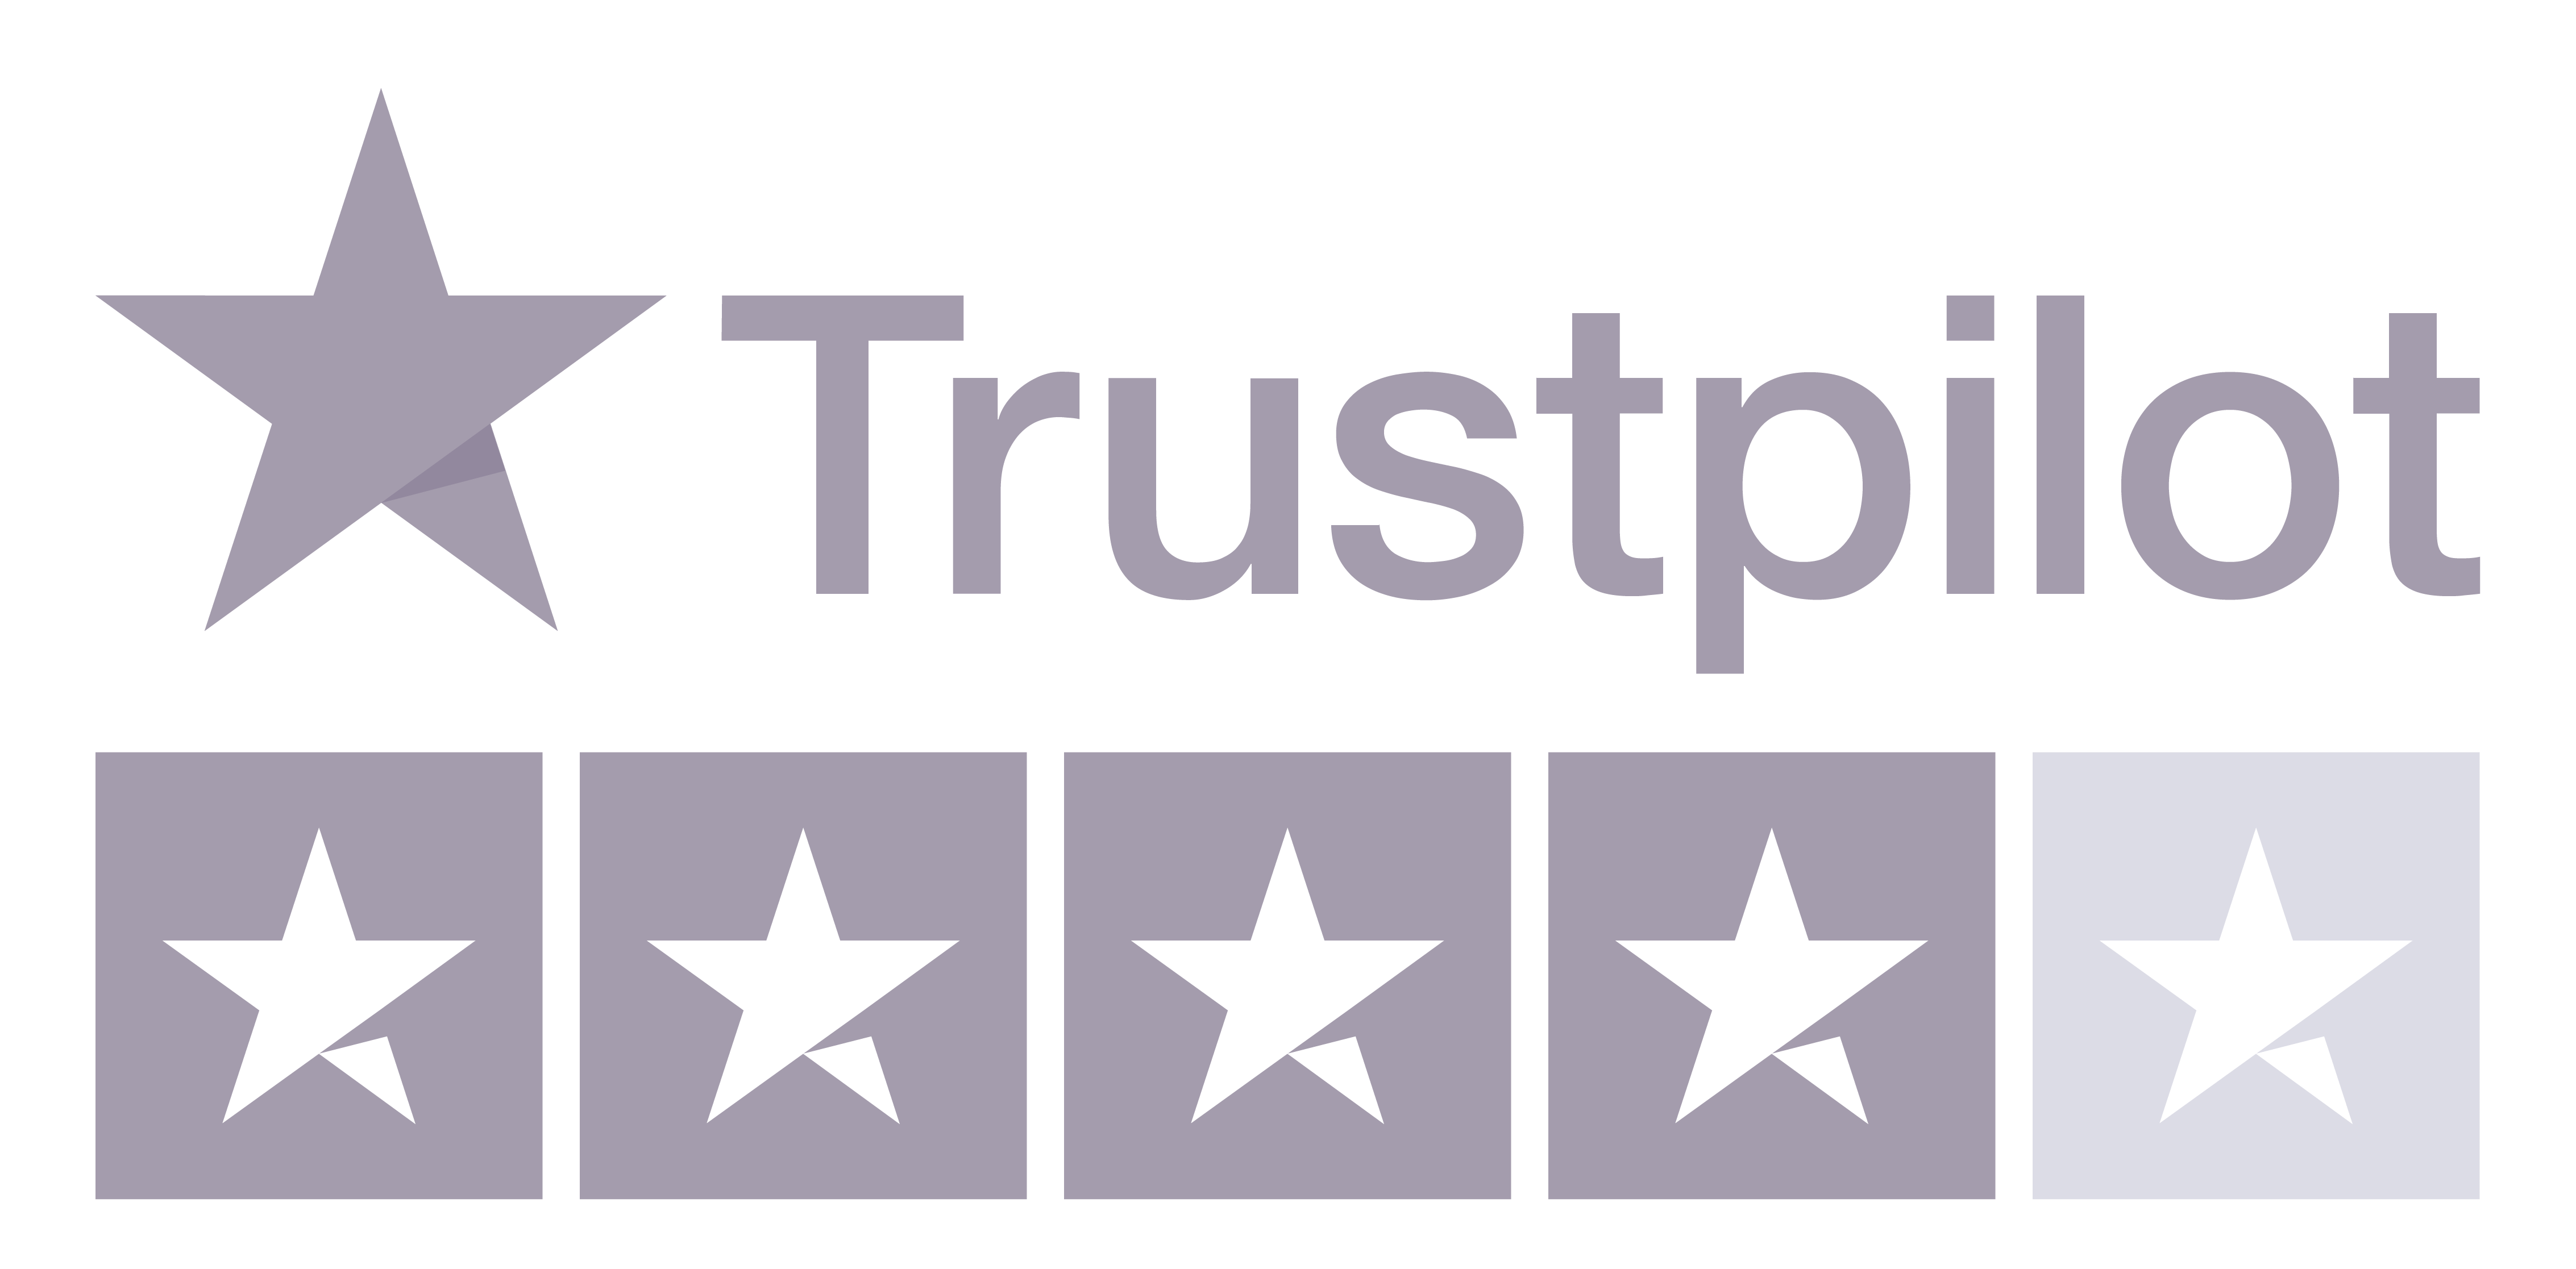 Trustpilot Rating - Ionburst Cloud's rating as of the 13th March 2023 is 4 out of 5 stars.